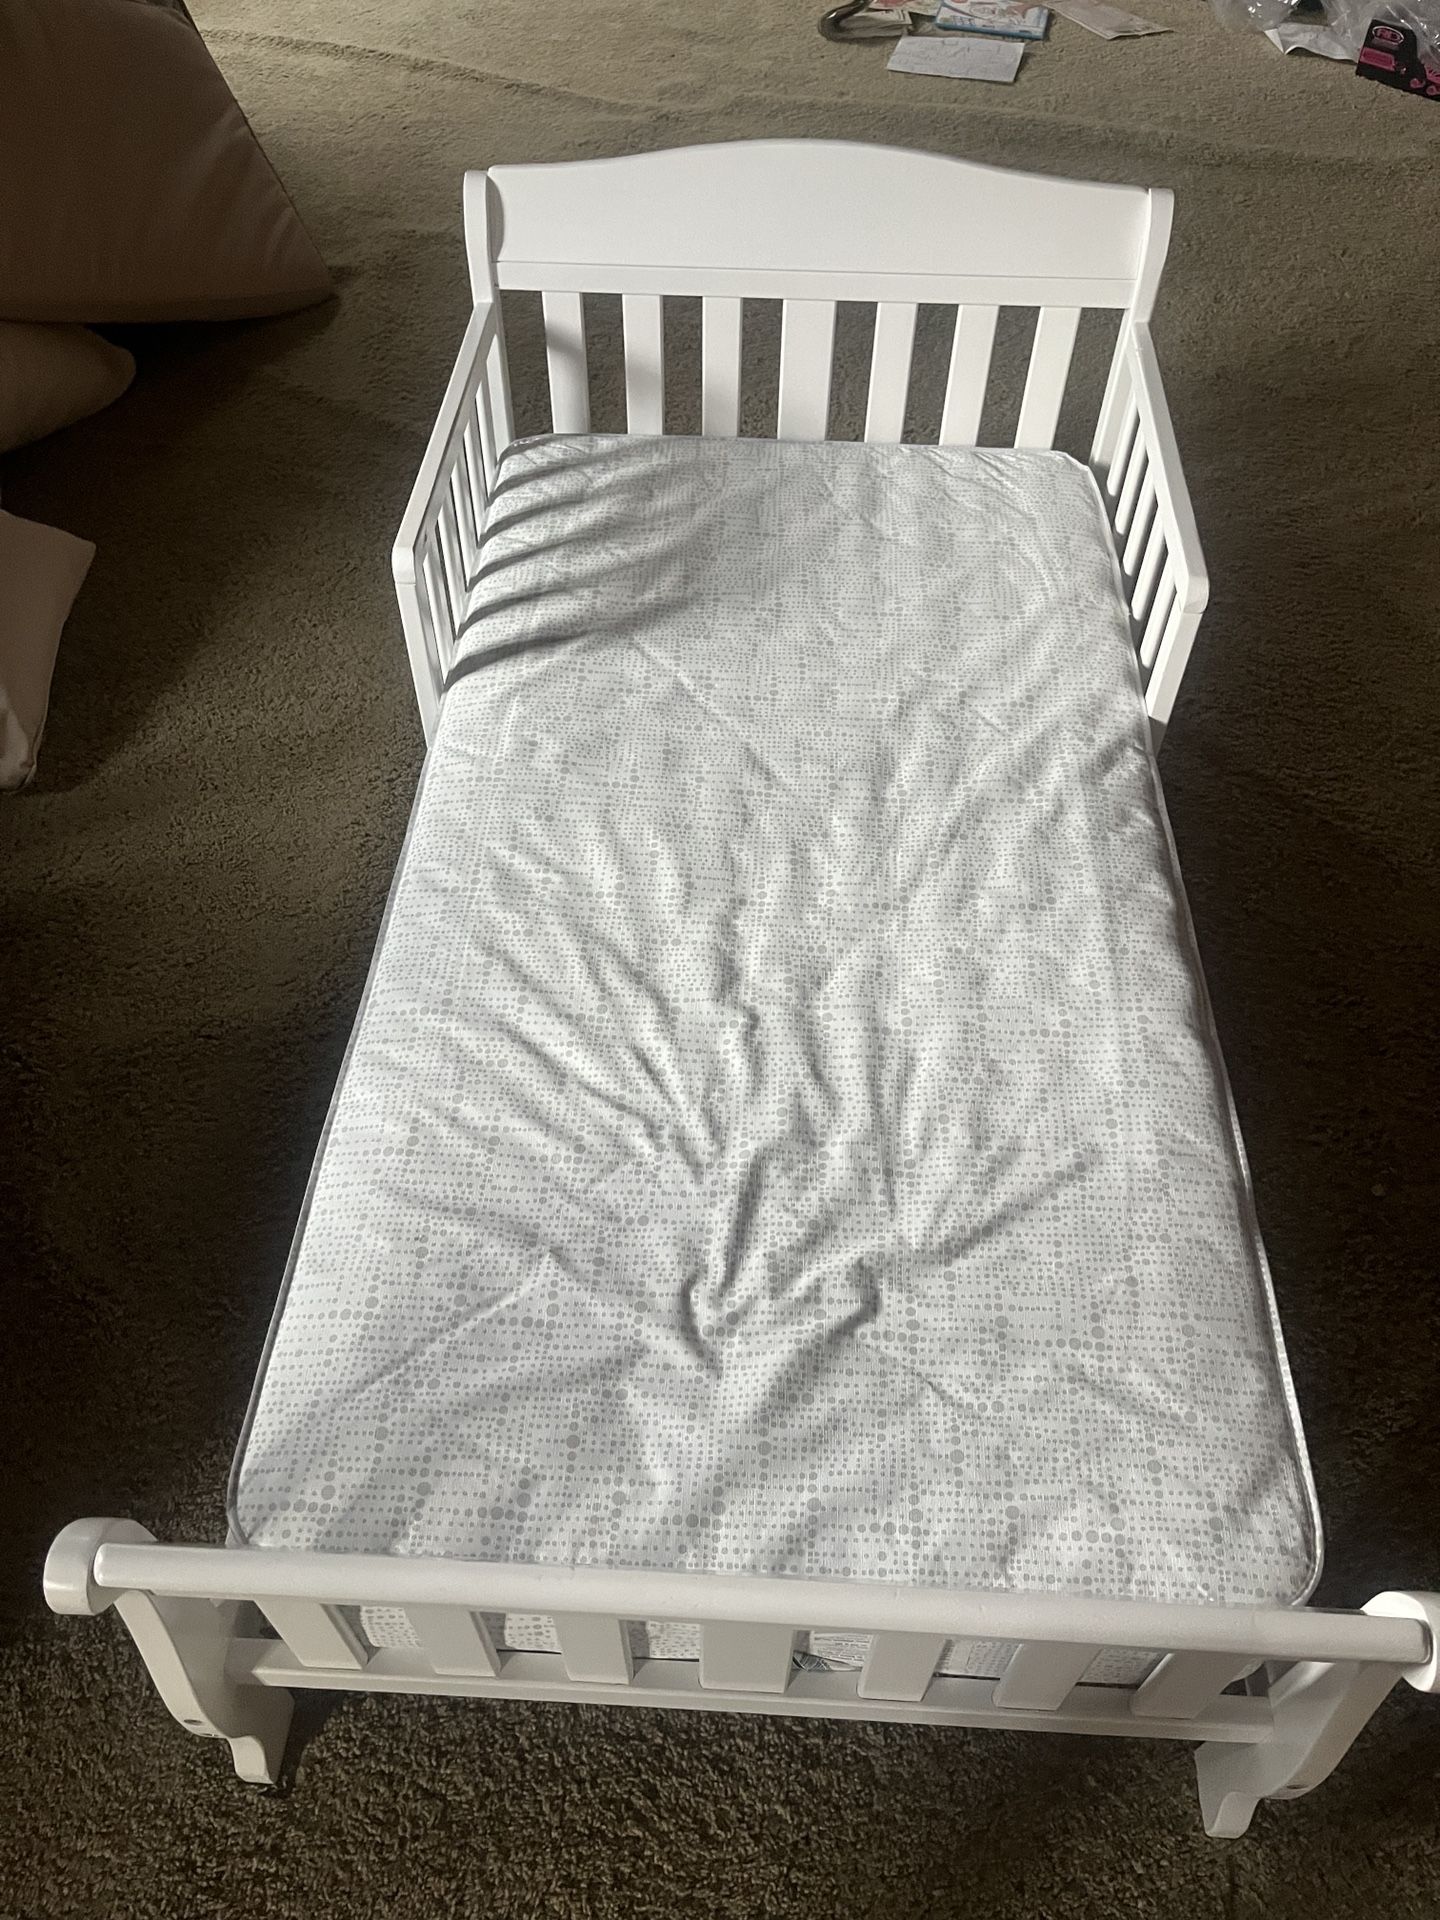 Toddler Bed With Matress